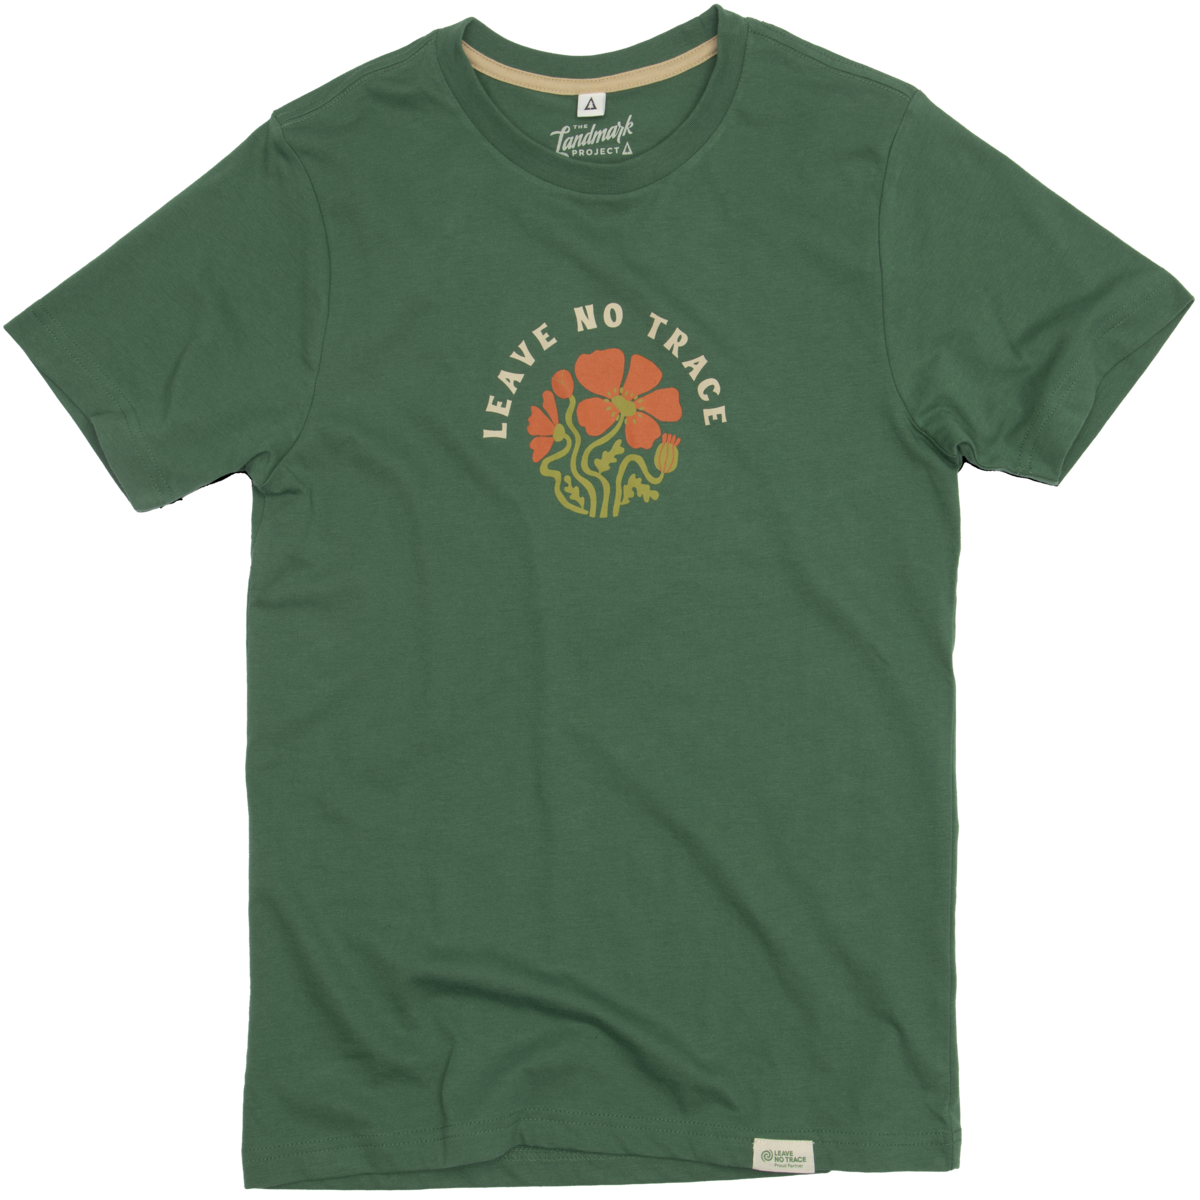 Leave No Trace Tee